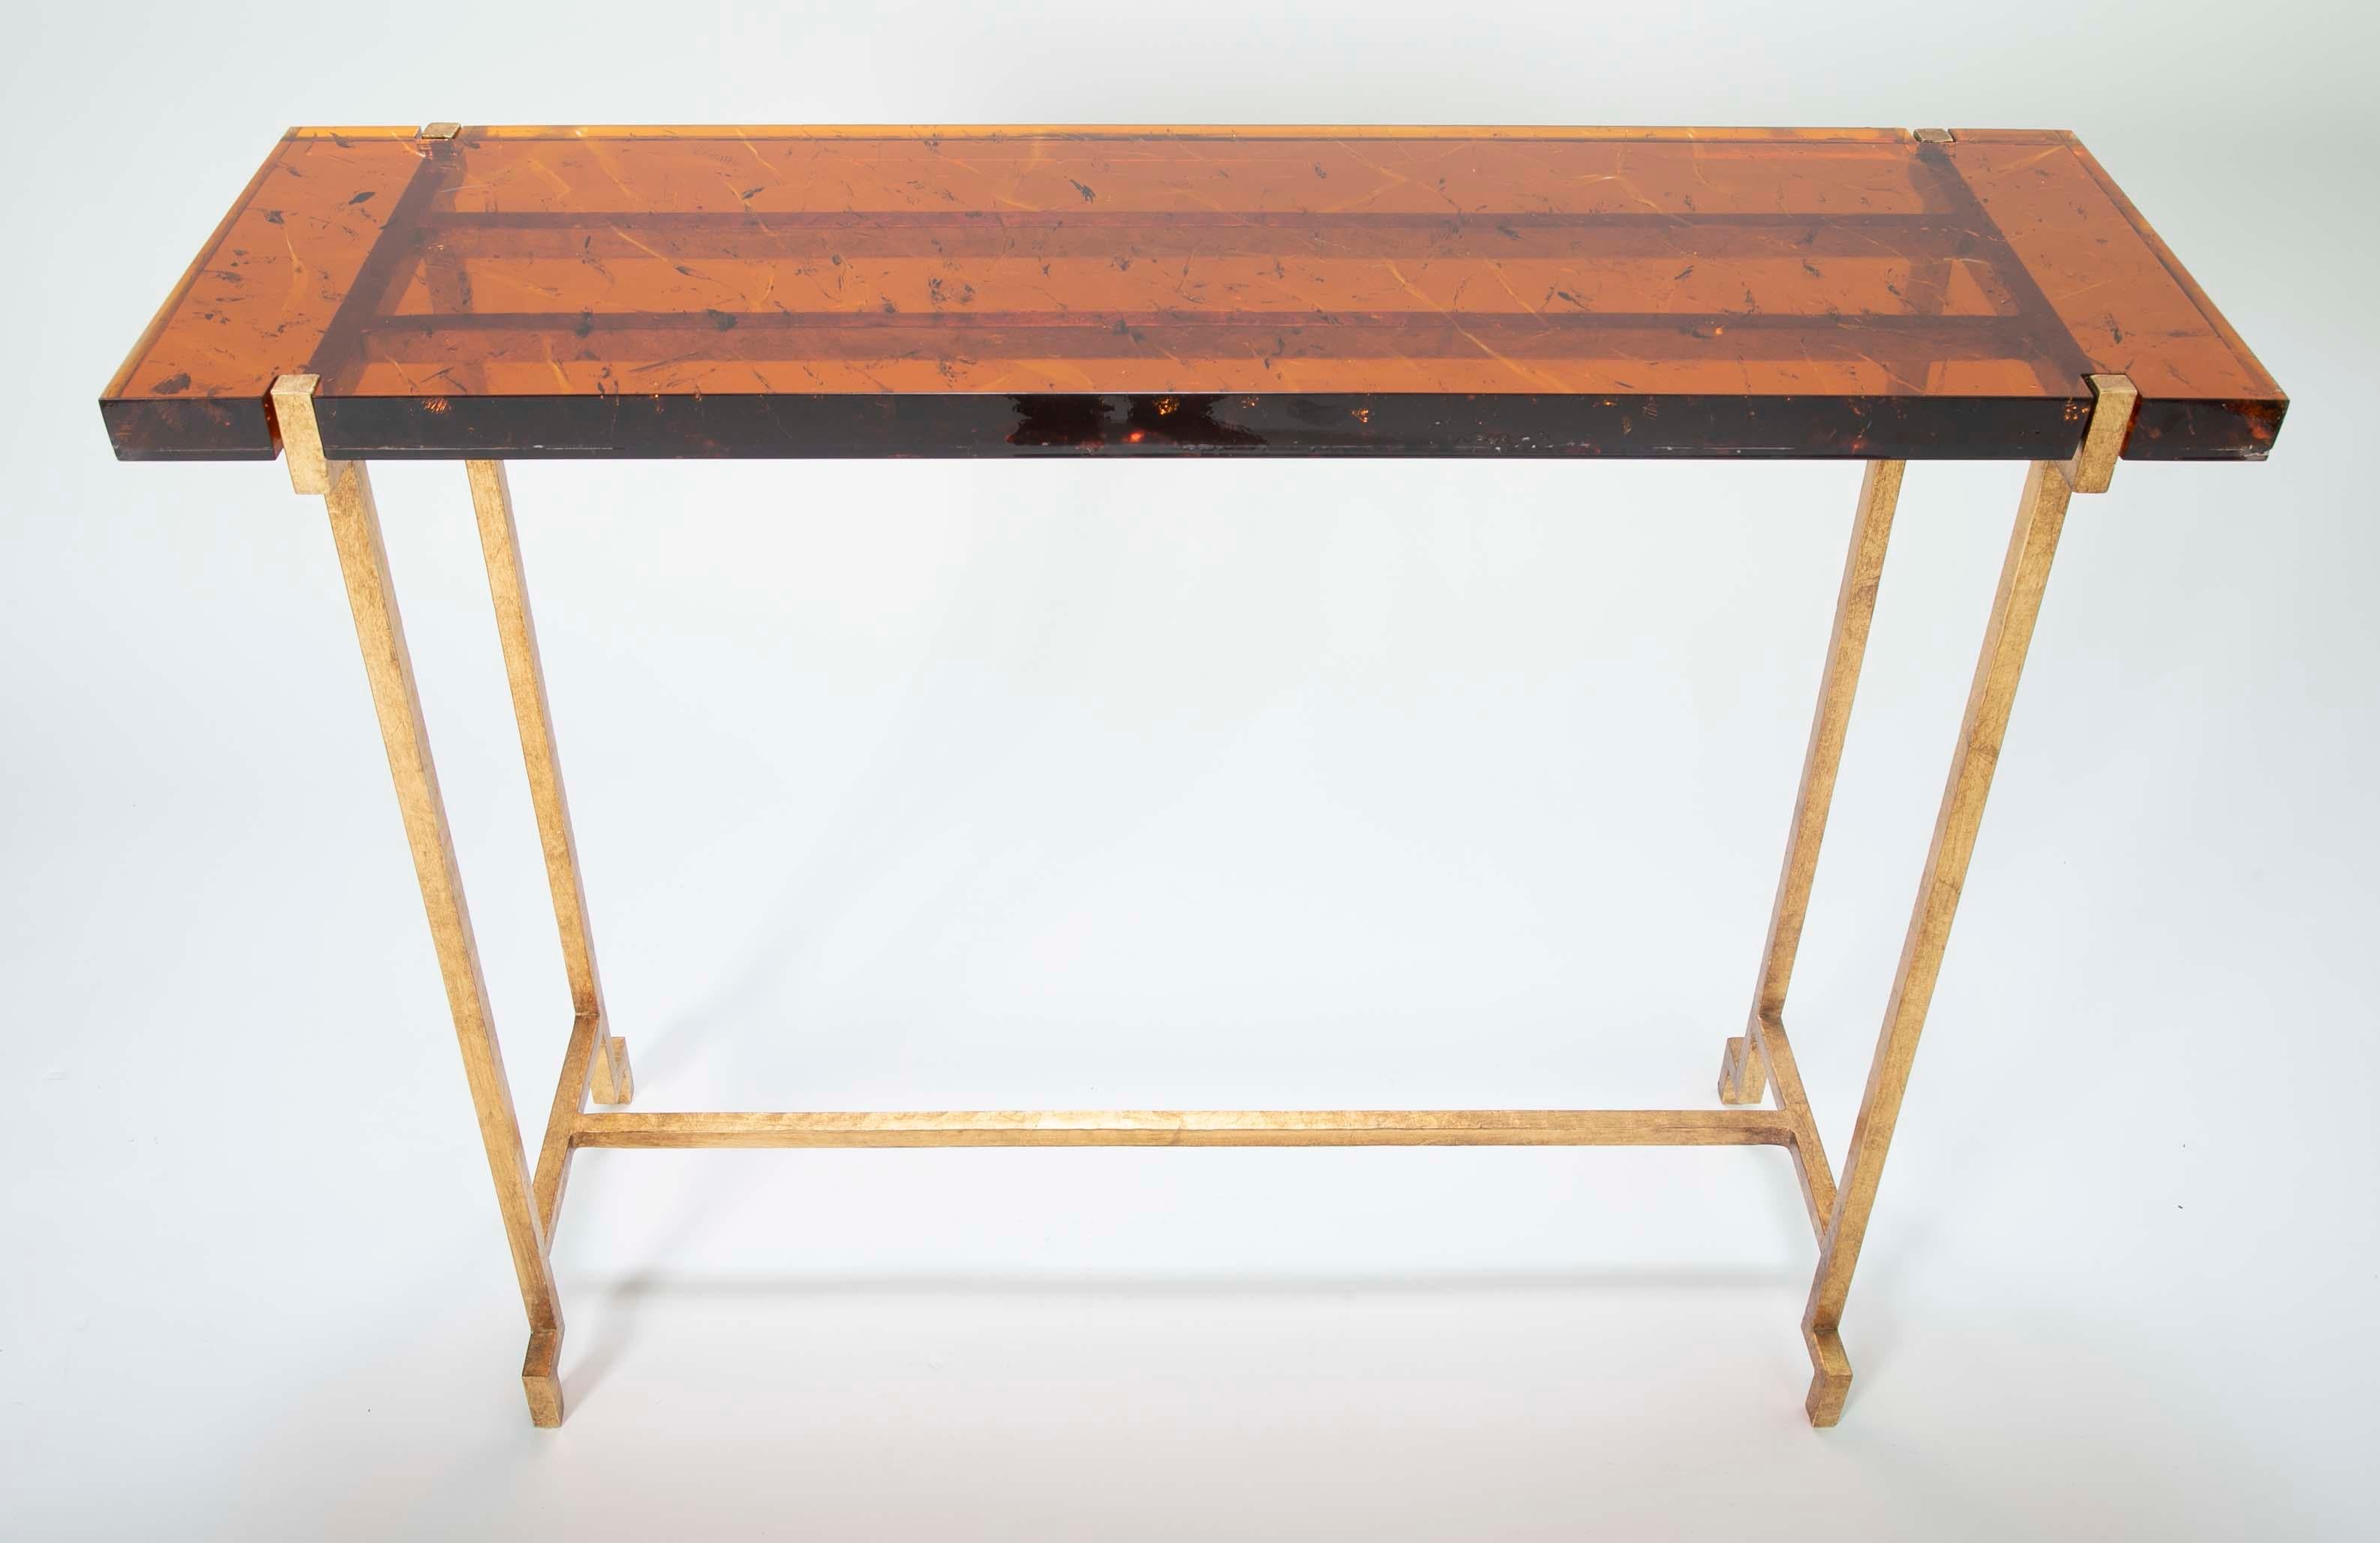 A gilt steel console table with amber toned Lucite top. The top was designed to have fissures imbedded throughout the Amber Lucite.